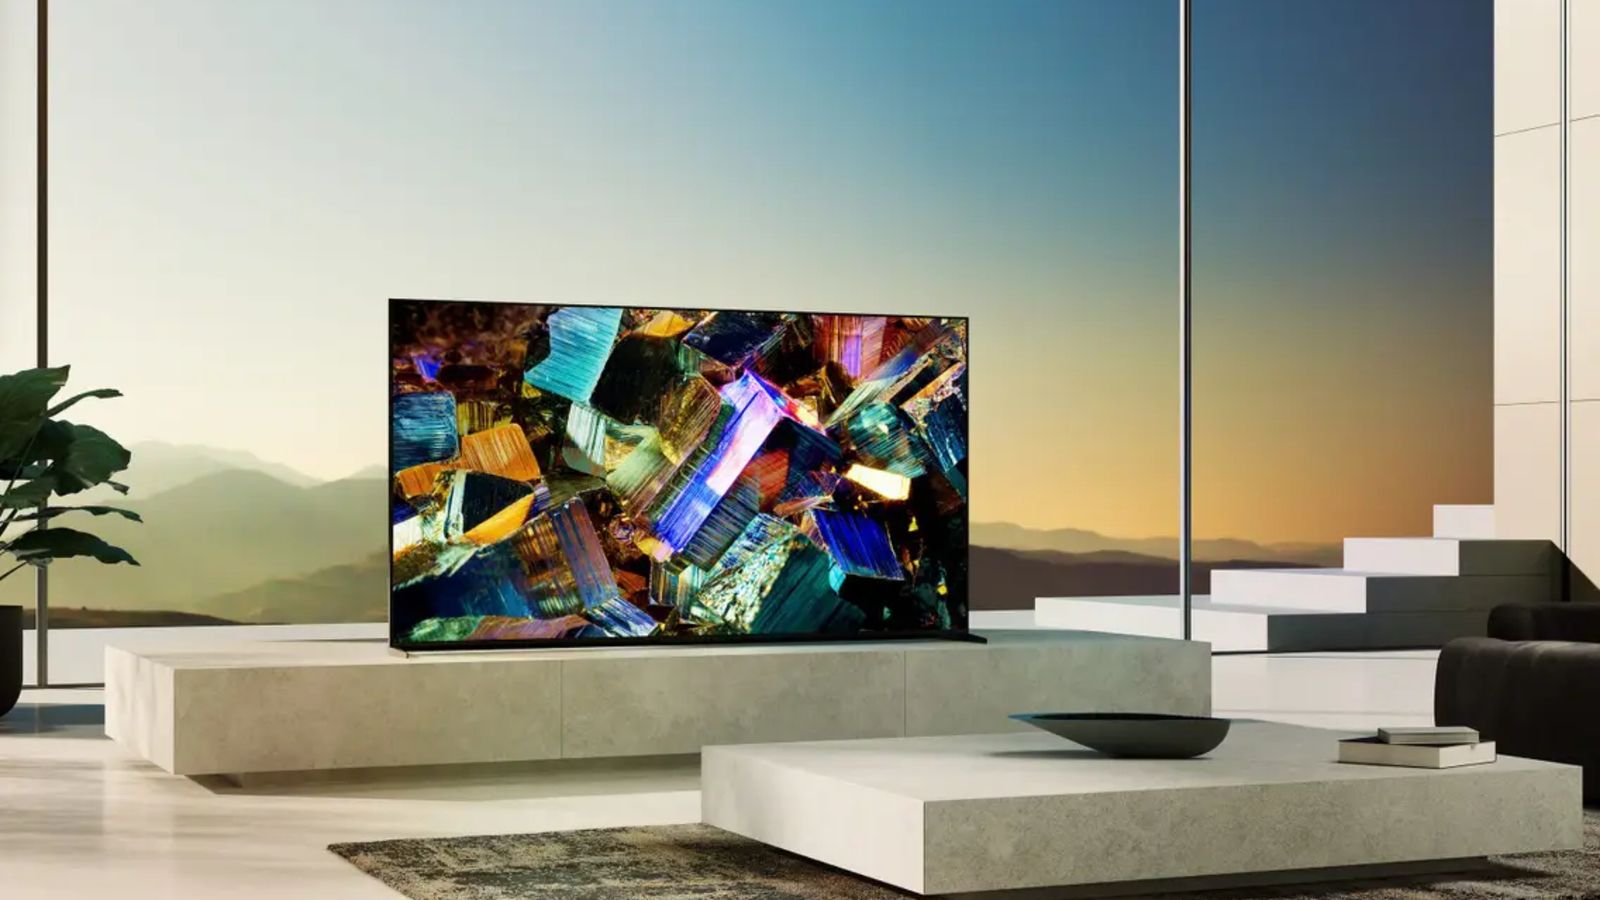 A large flatscreen Samsung TV sat on a white stand in front of a large window.